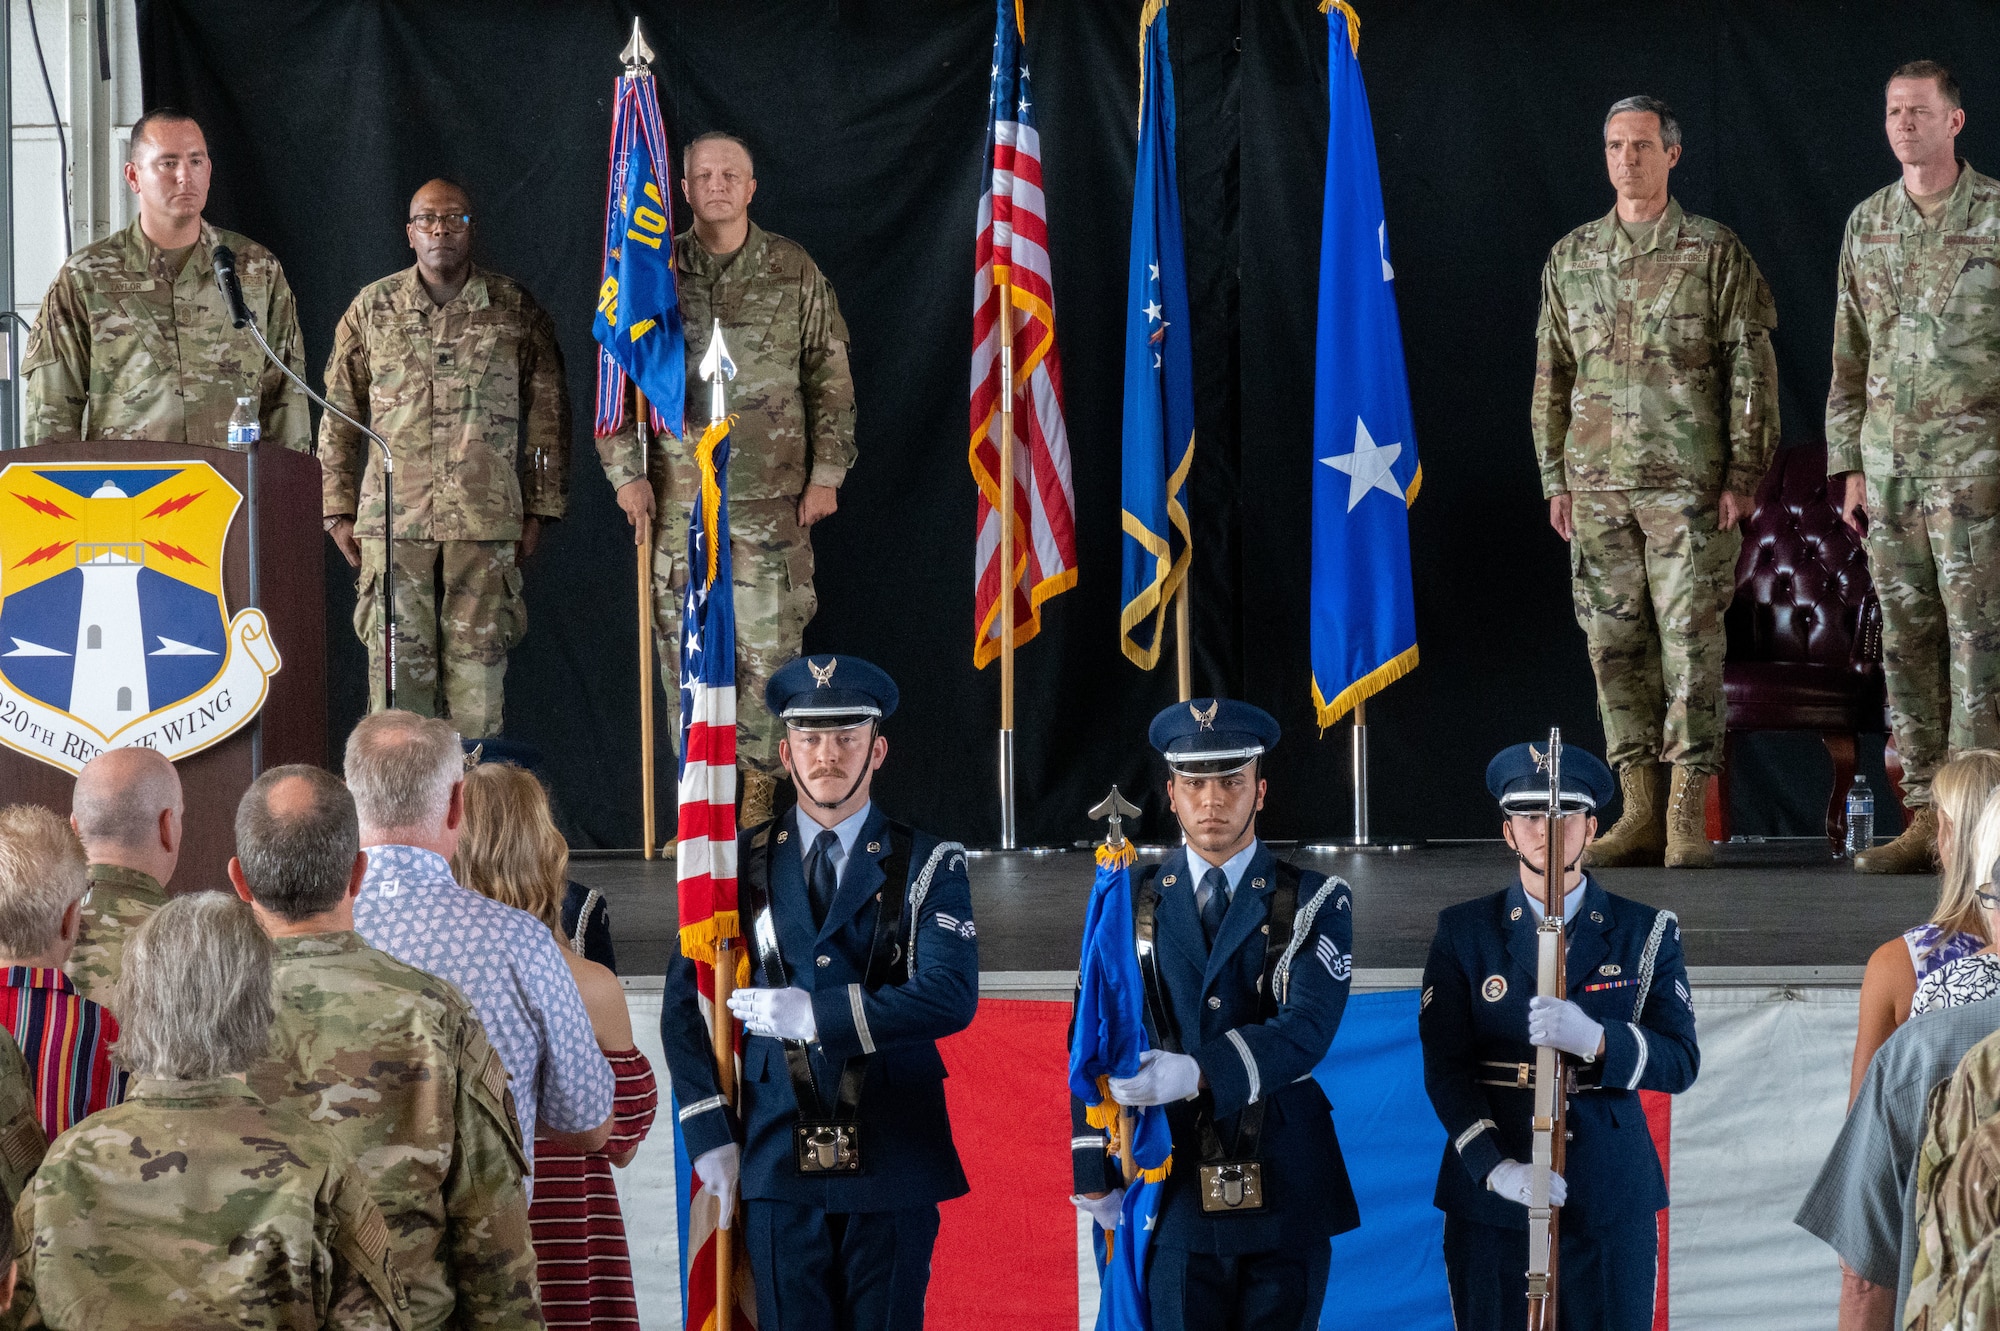 The 920th Rescue Wing honor guard present the colors during a change of command ceremony, Sept. 11, 2022, at Patrick Space Force Base, Florida. The change of command is a military tradition that formally signifies the transfer of responsibility and authority from one commanding officer to another; symbolized through the passing of a guidon. (U.S. Air Force photo by Master Sgt. Kelly Goonan)